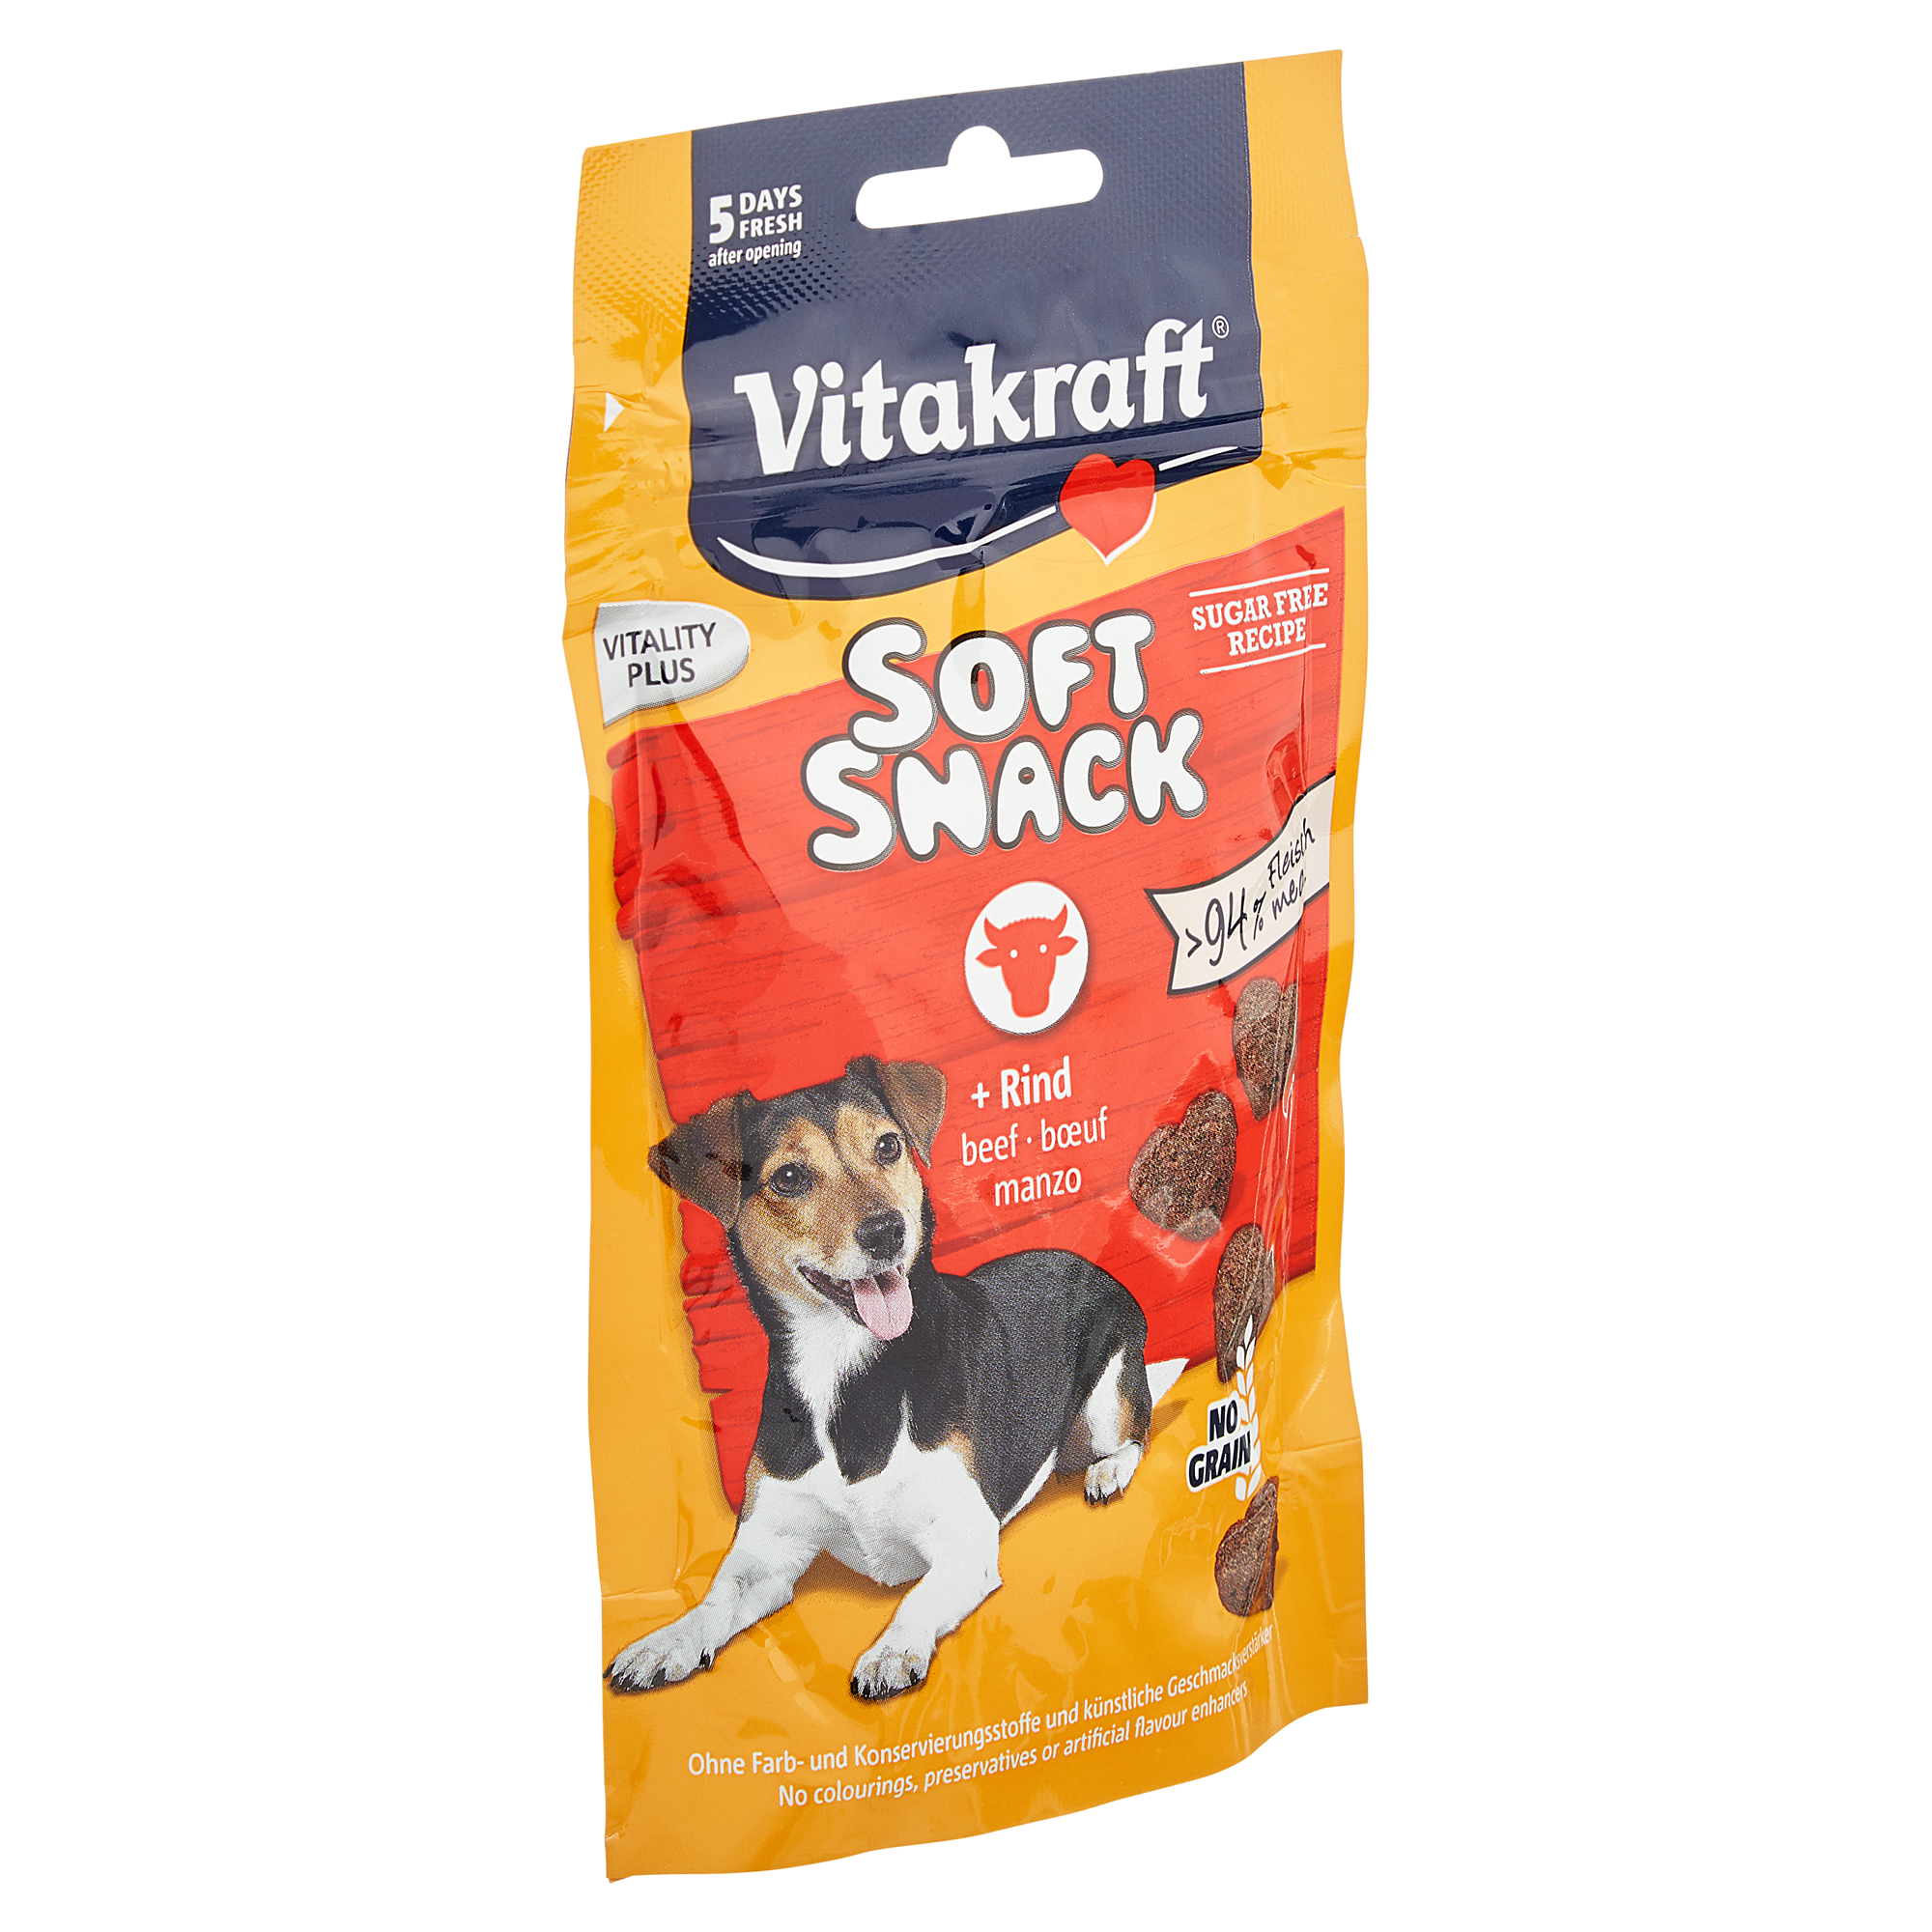 Hundesnack "Soft Snack" mit Rind 55 g + product picture